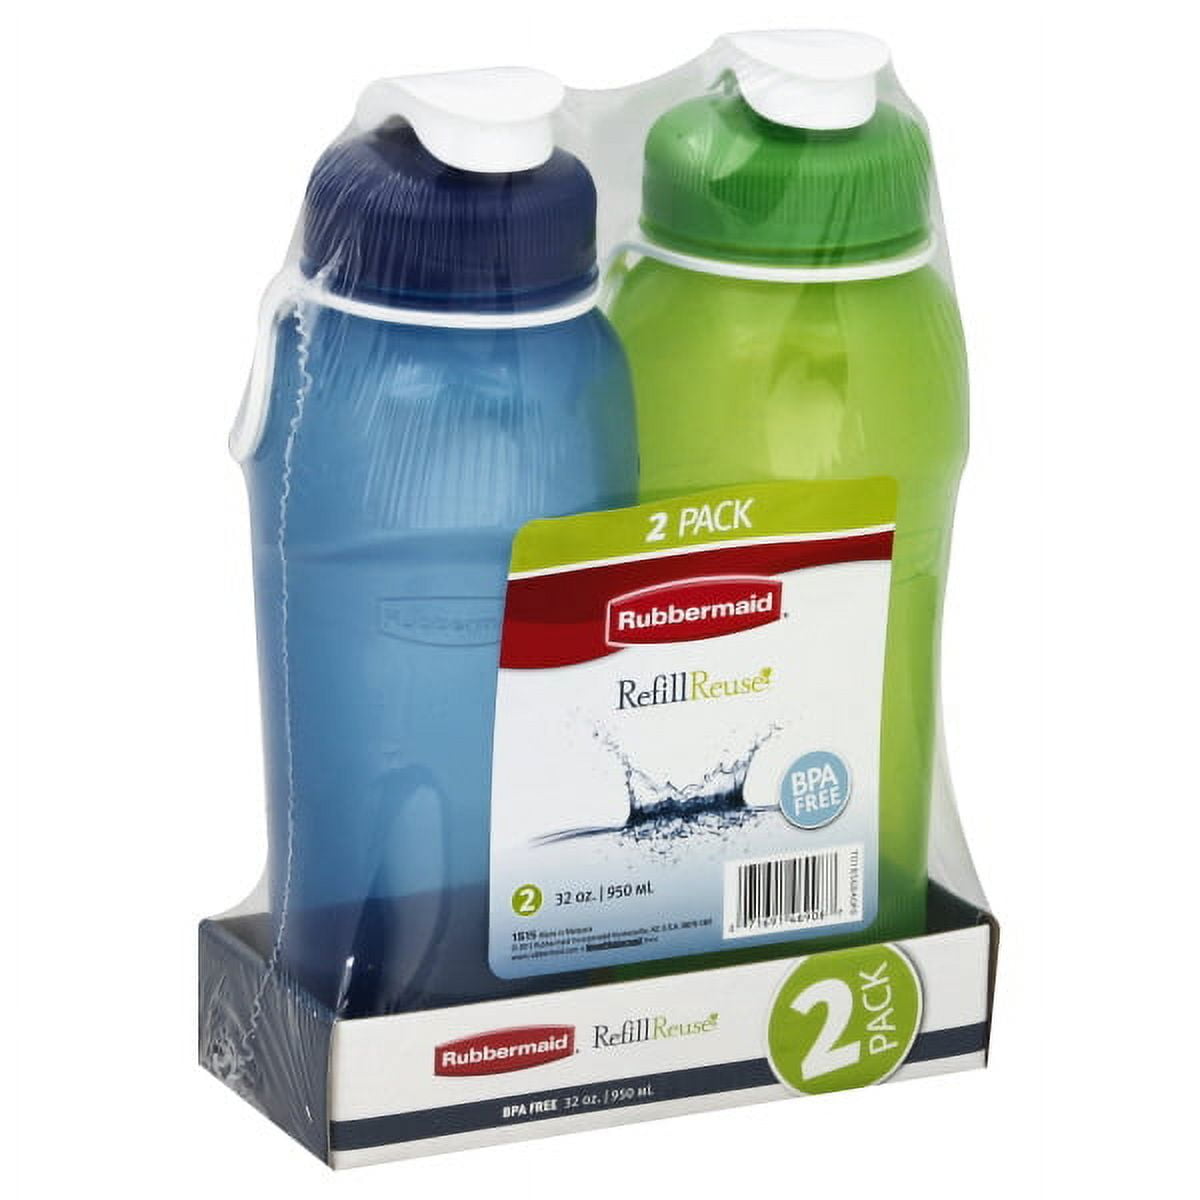 Rubbermaid Design Series Bottle, 20 Ounce, Plastic Containers